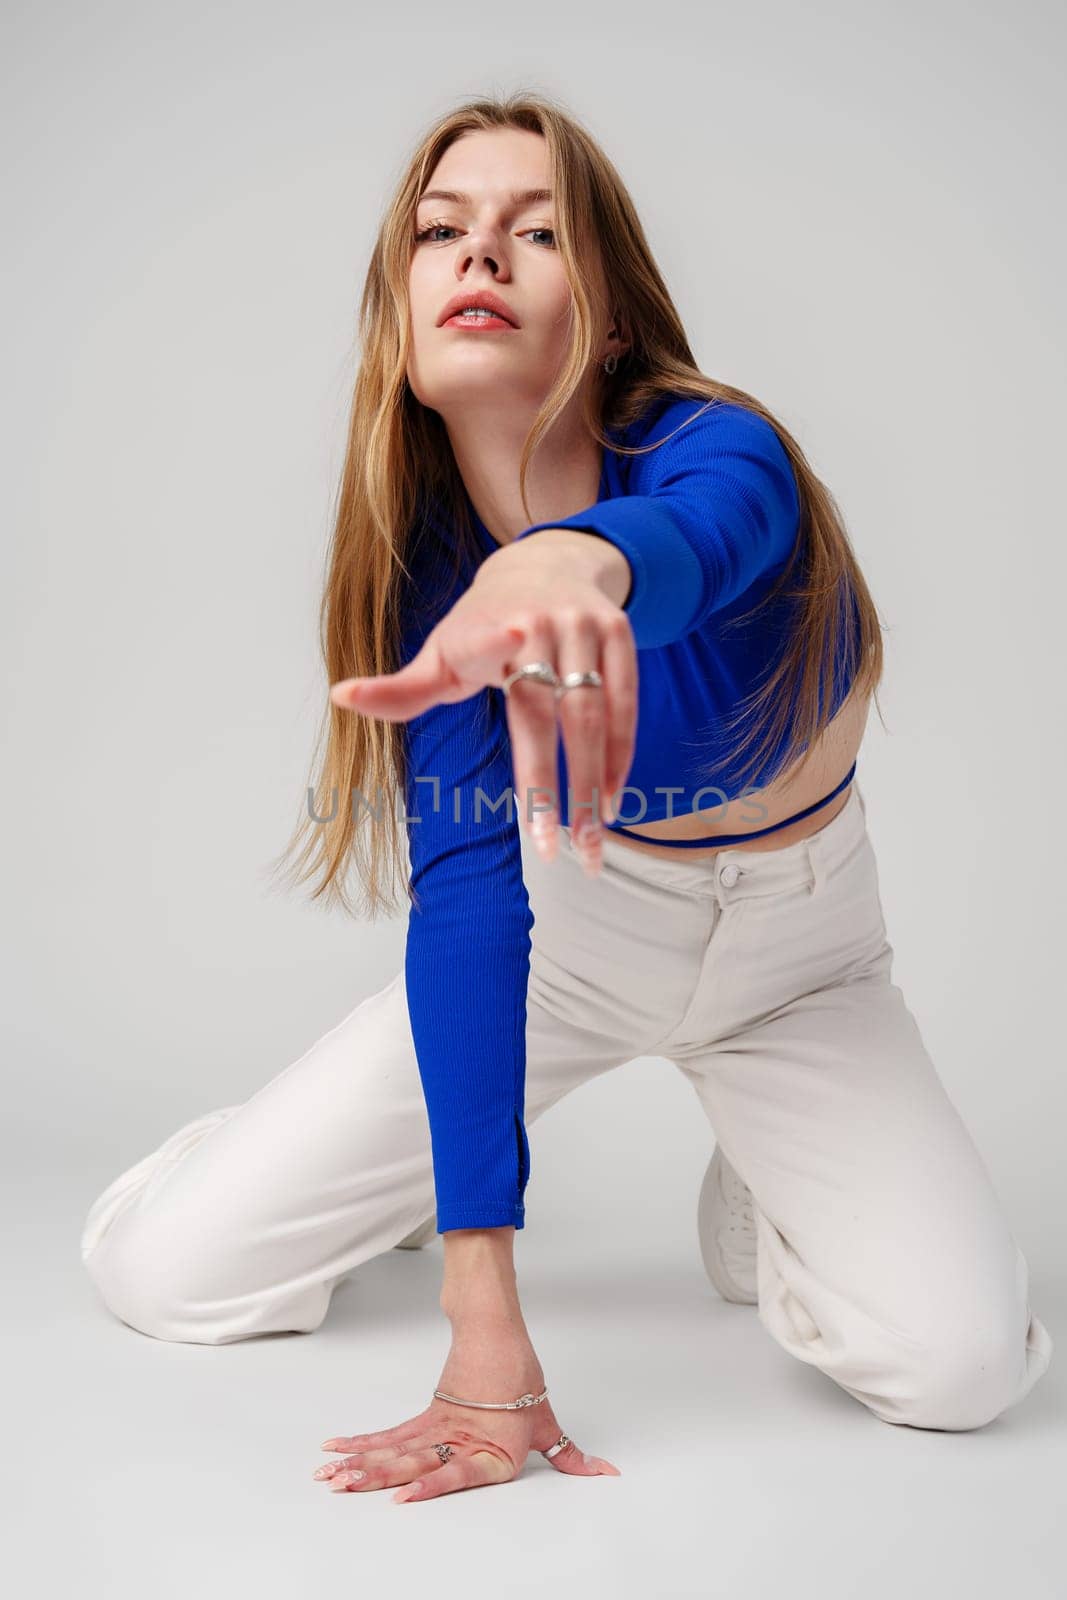 Young Woman model in Blue Top and White Pants posing on white background by Fabrikasimf